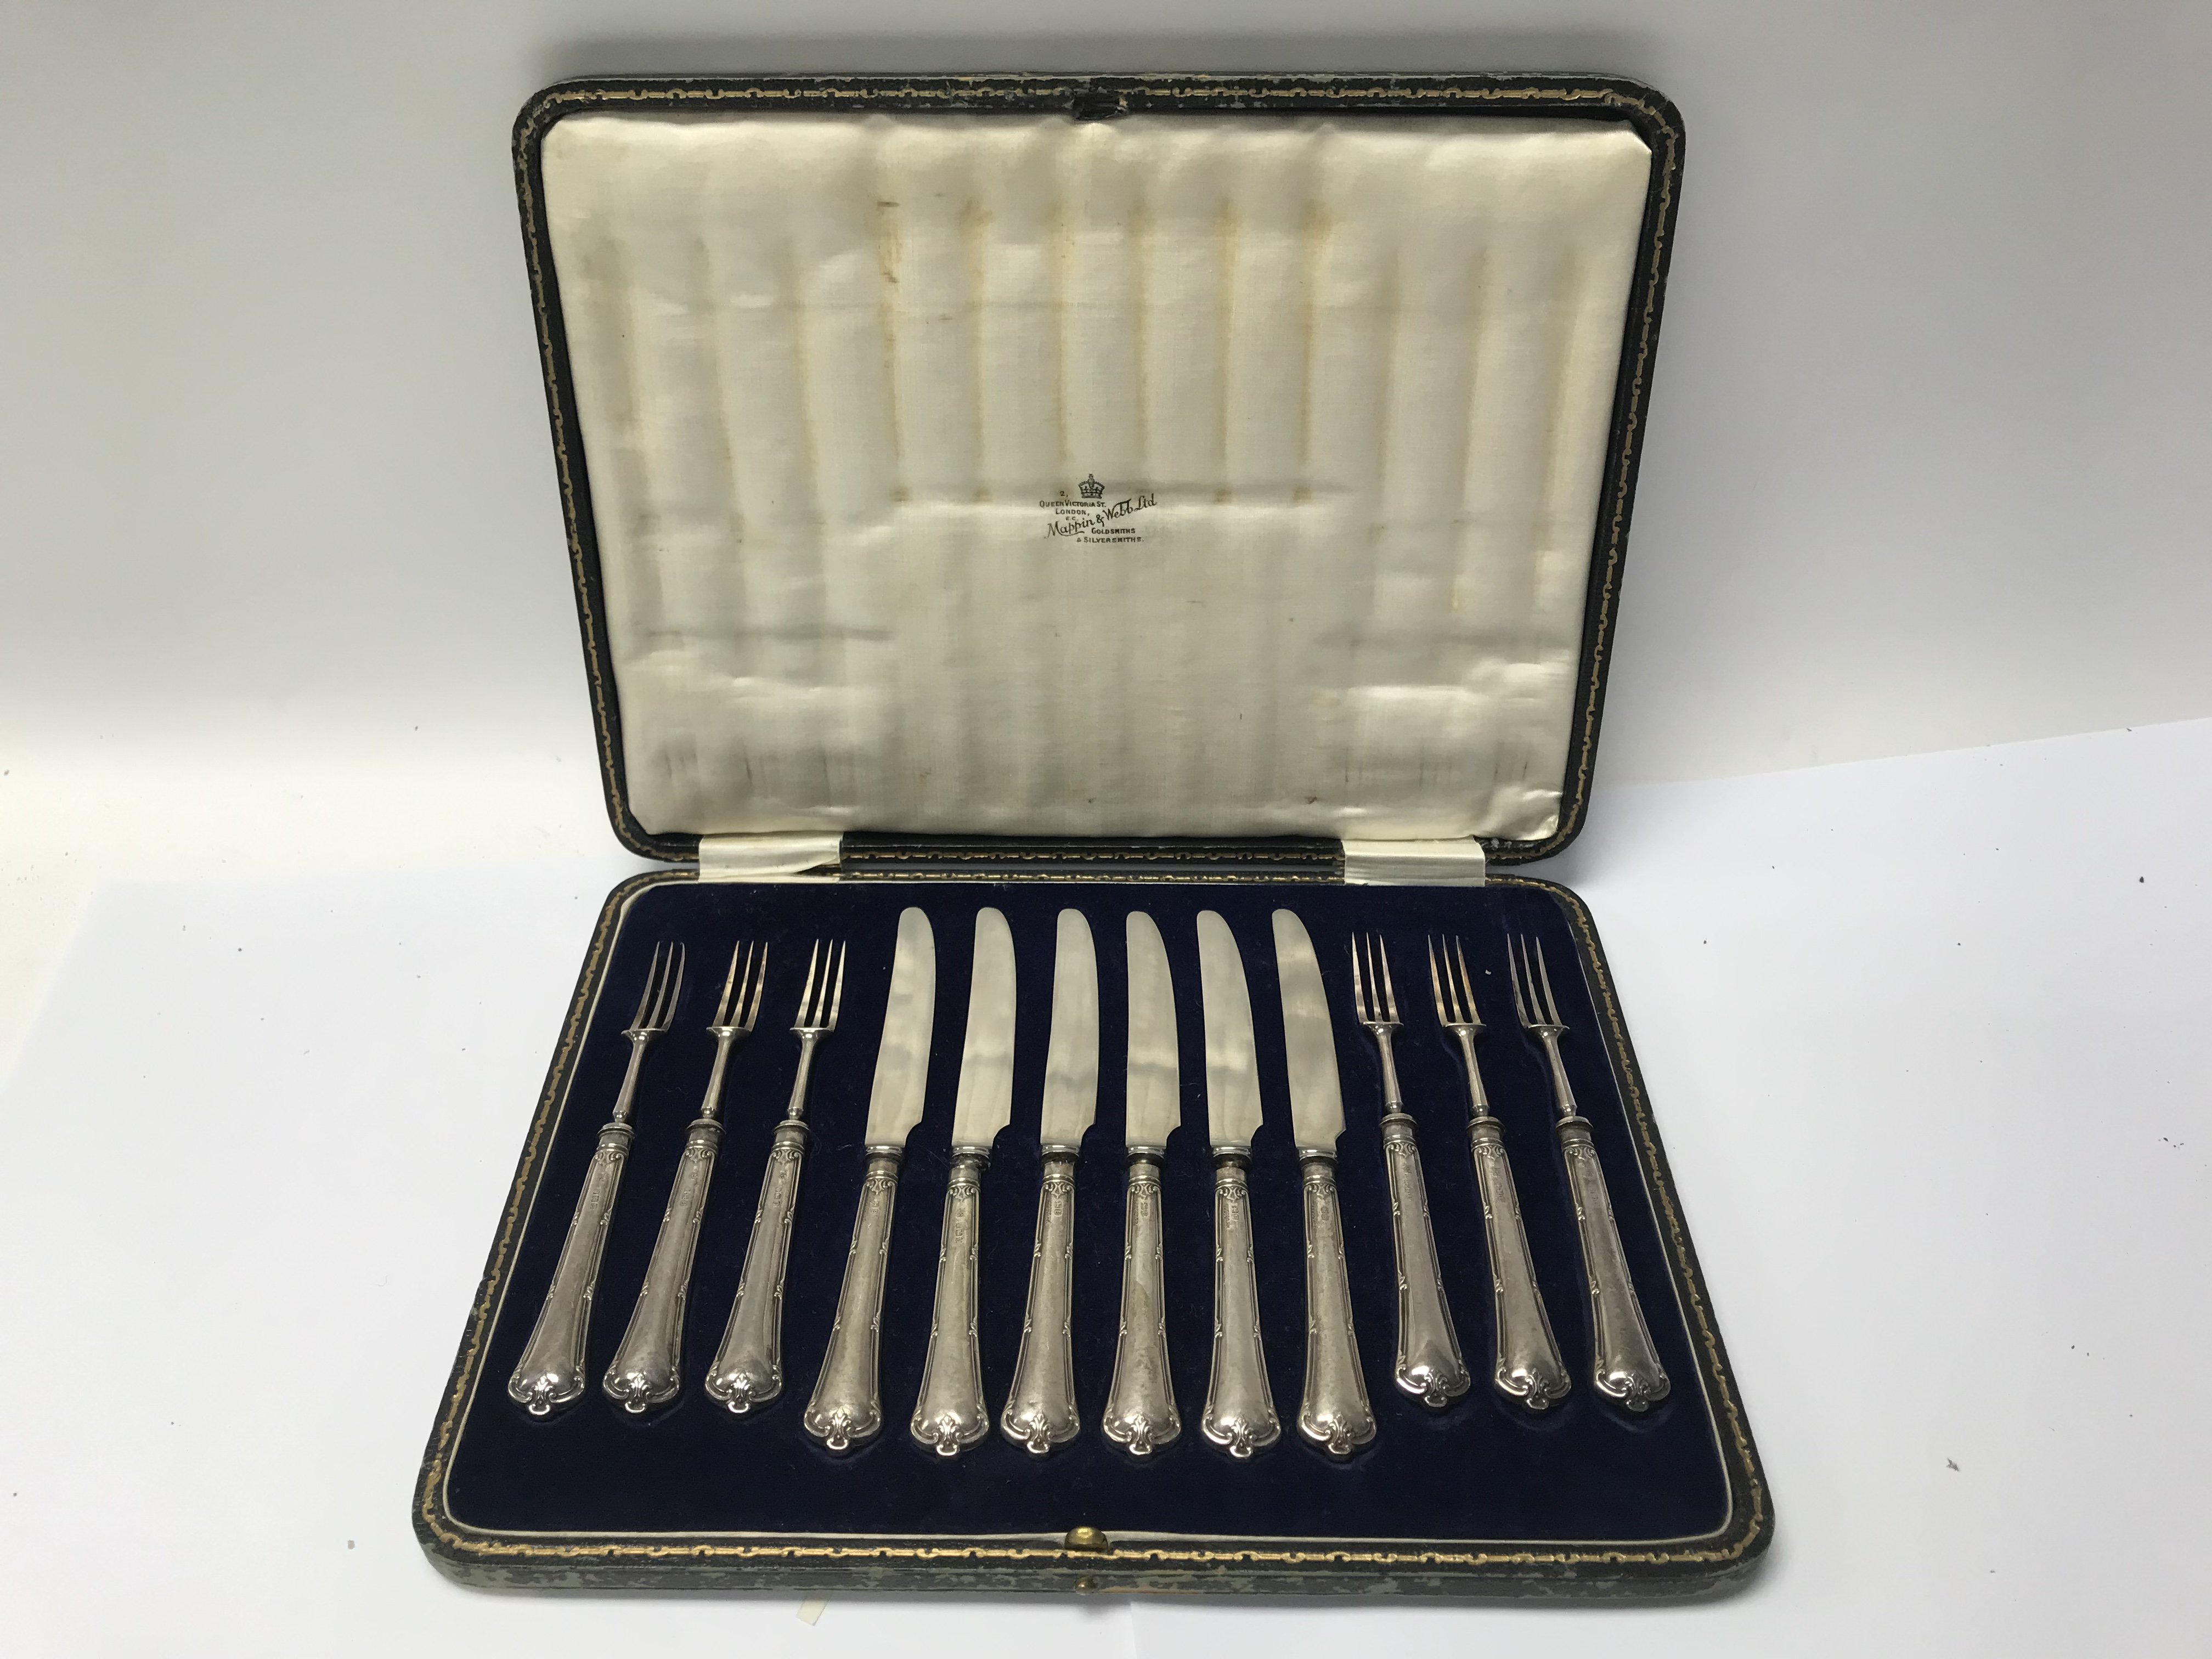 A cased set of silver handled knives and forks.